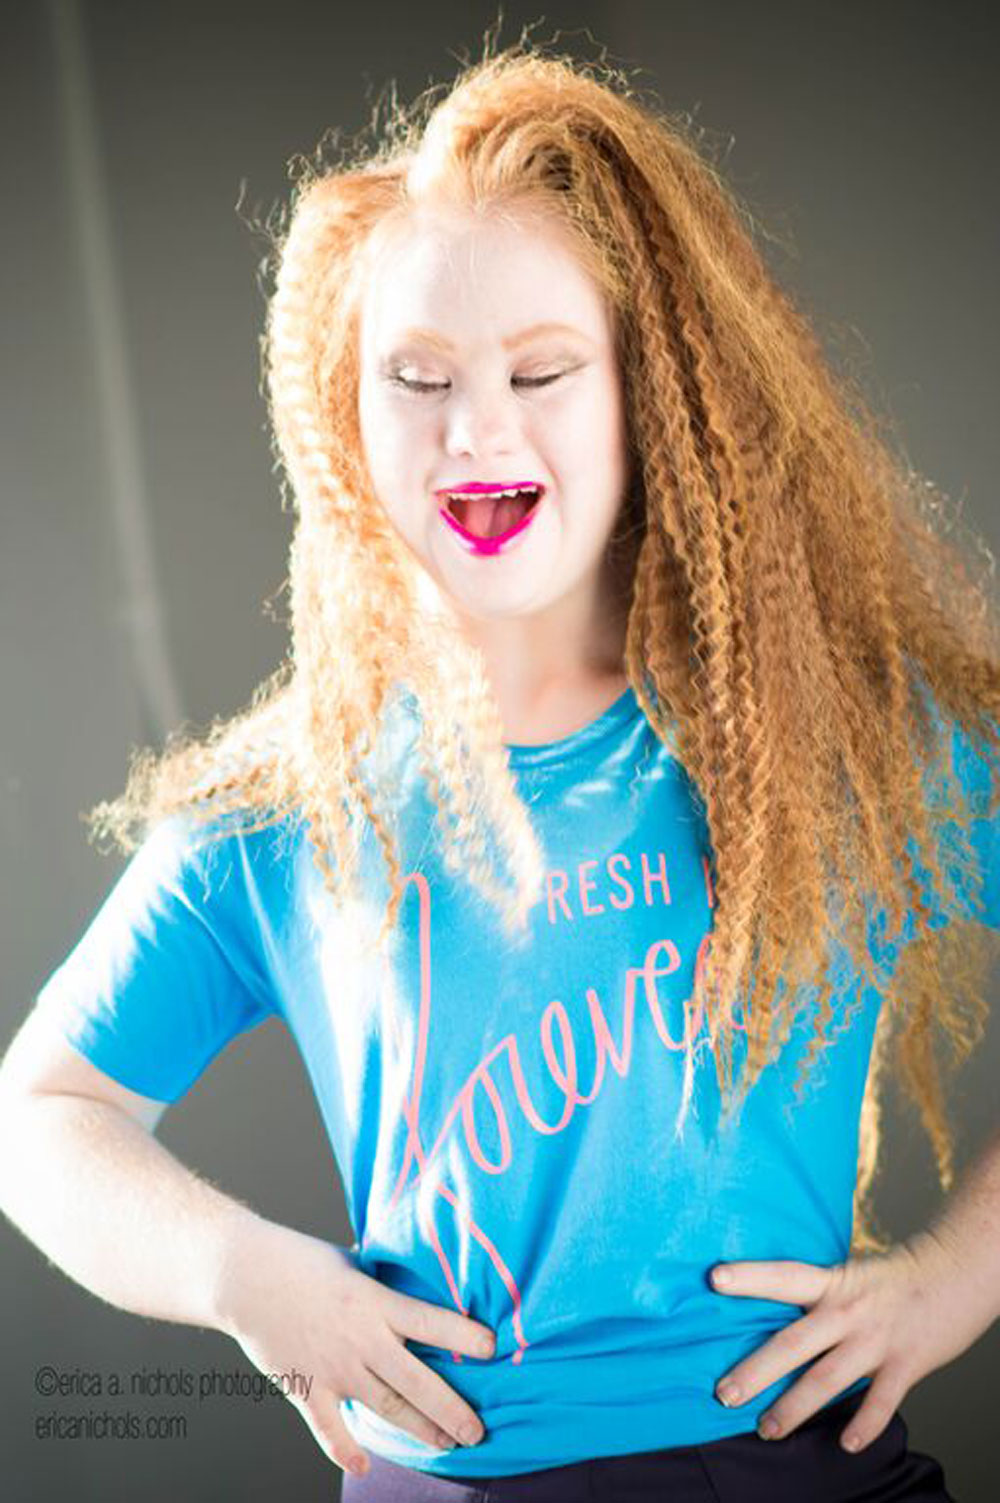 Terapi sandhed Dovenskab 18-Year-Old Model With Down Syndrome Will Walk at New York Fashion Week,  Change the World | Reckon Talk